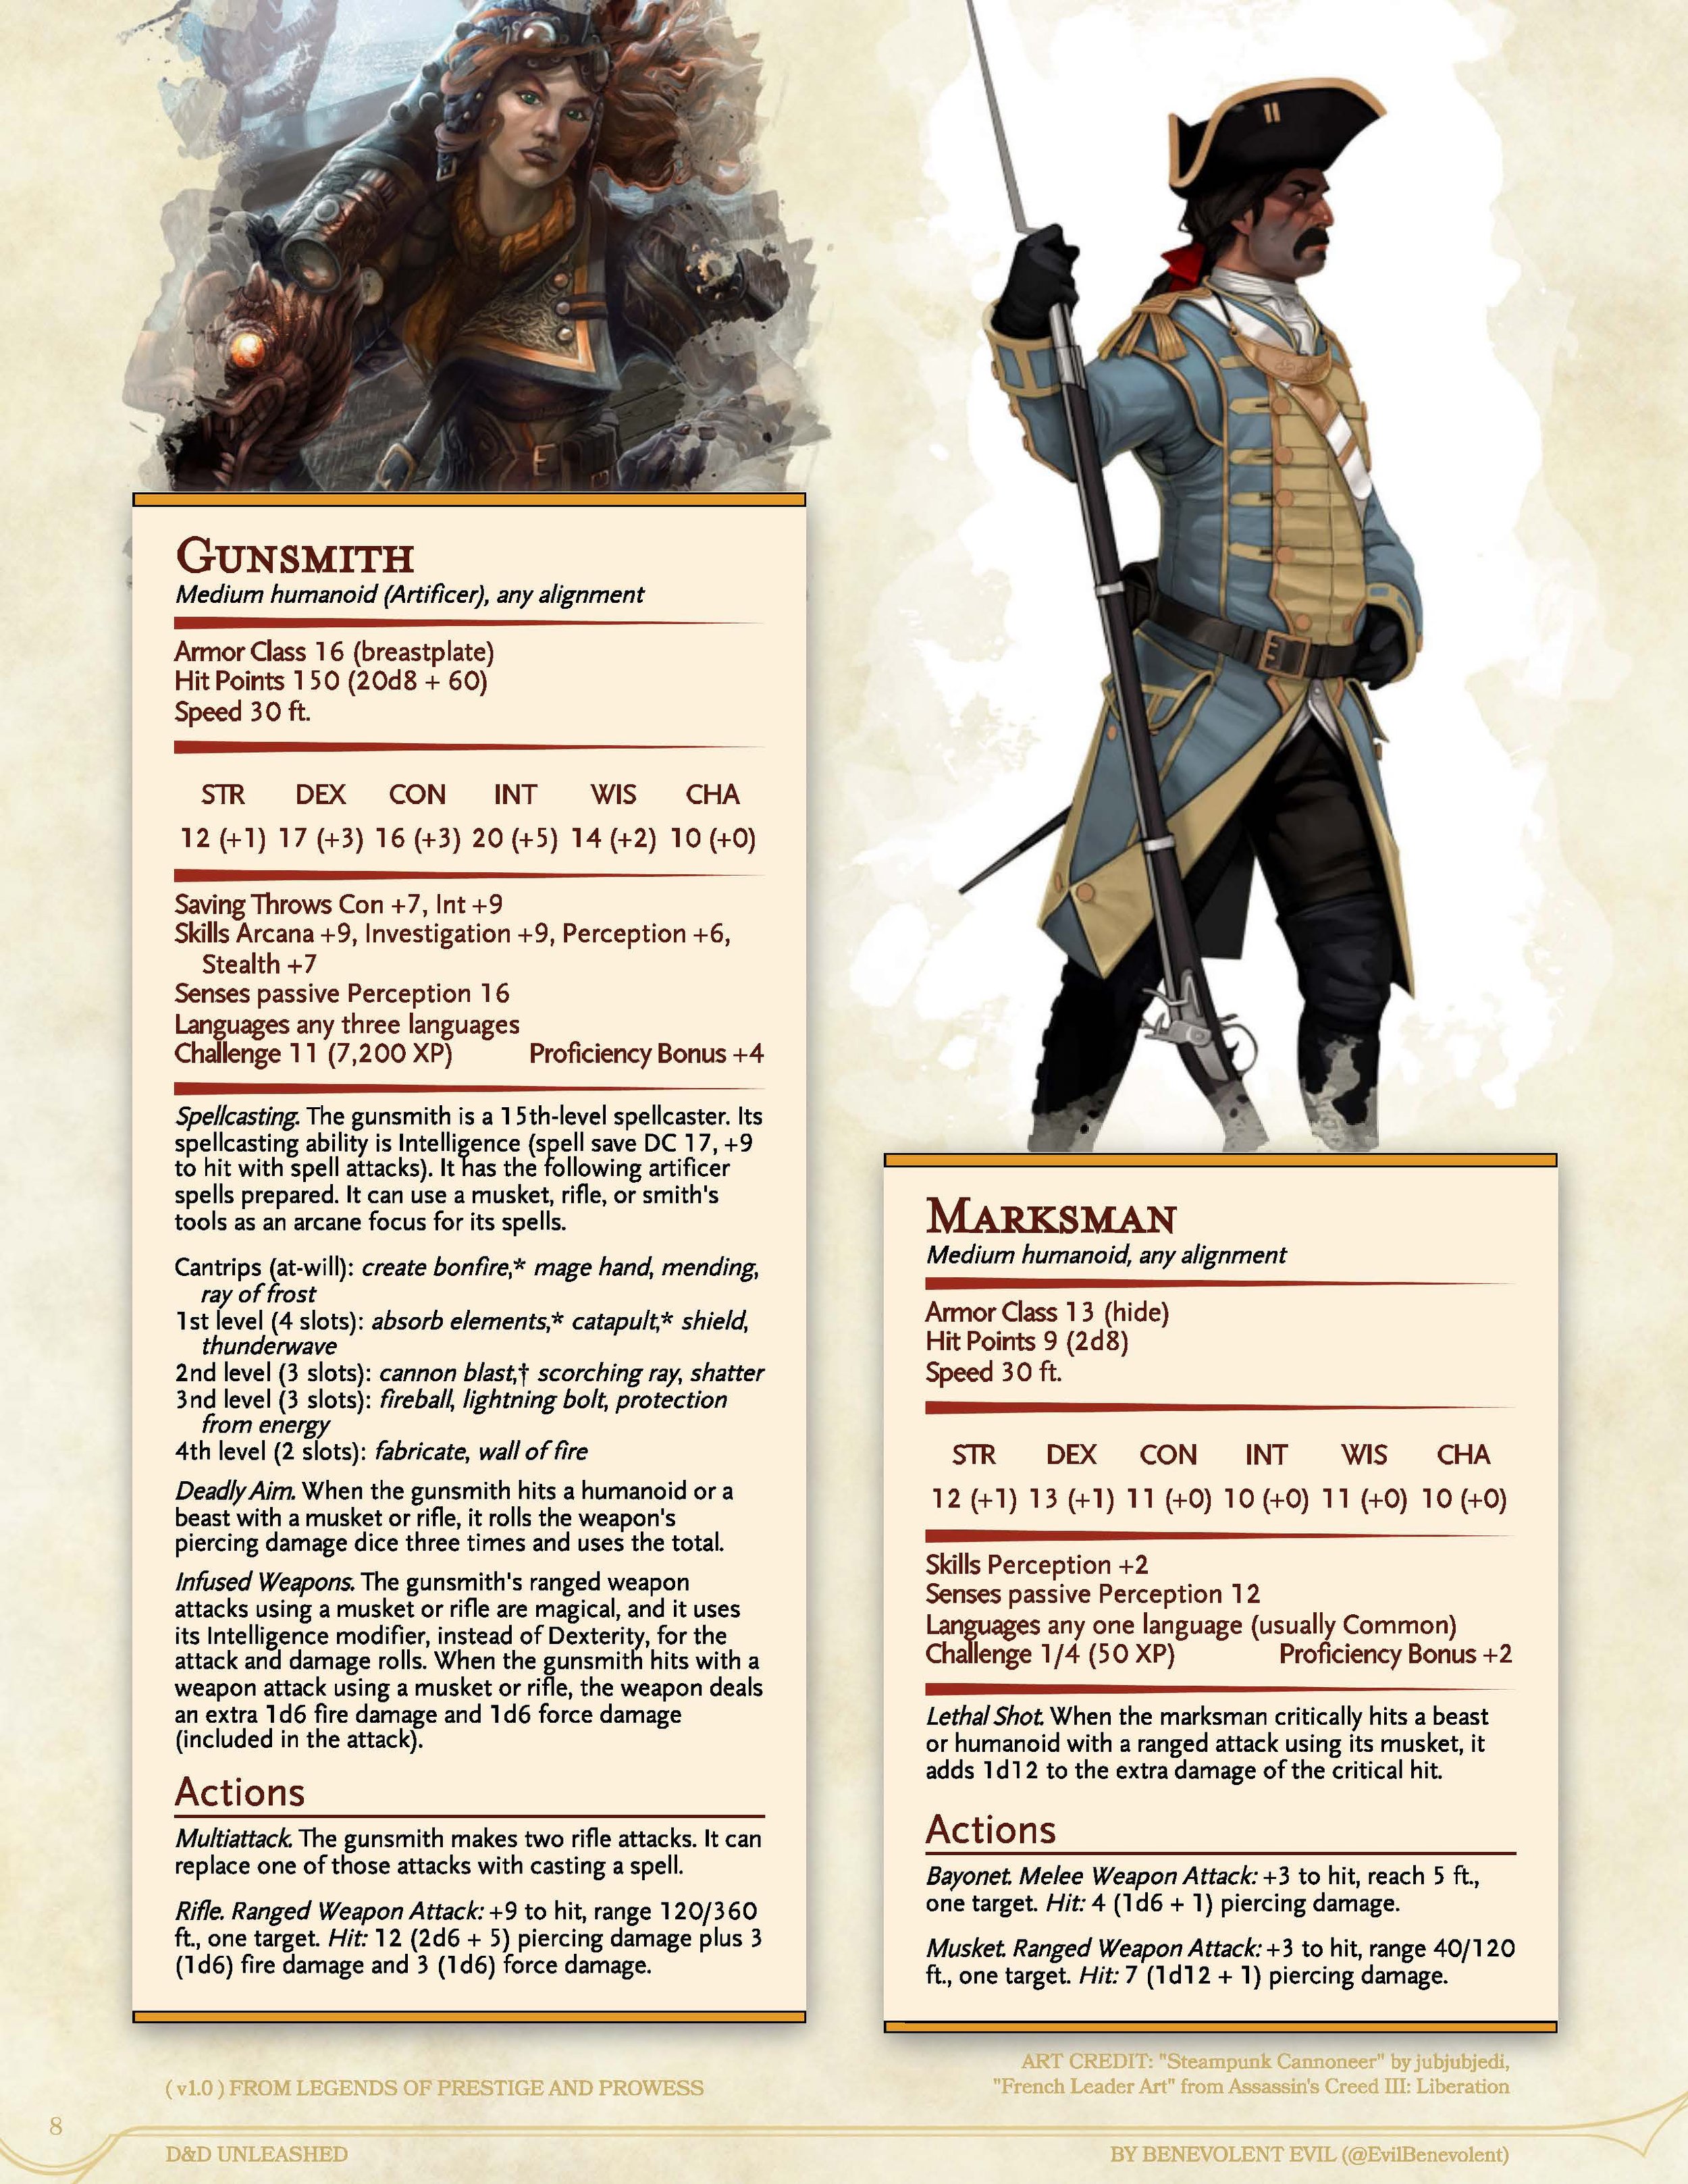 D&D Unleashed - Assorted Humanoid NPCs (v1_0)_Page_08.jpg